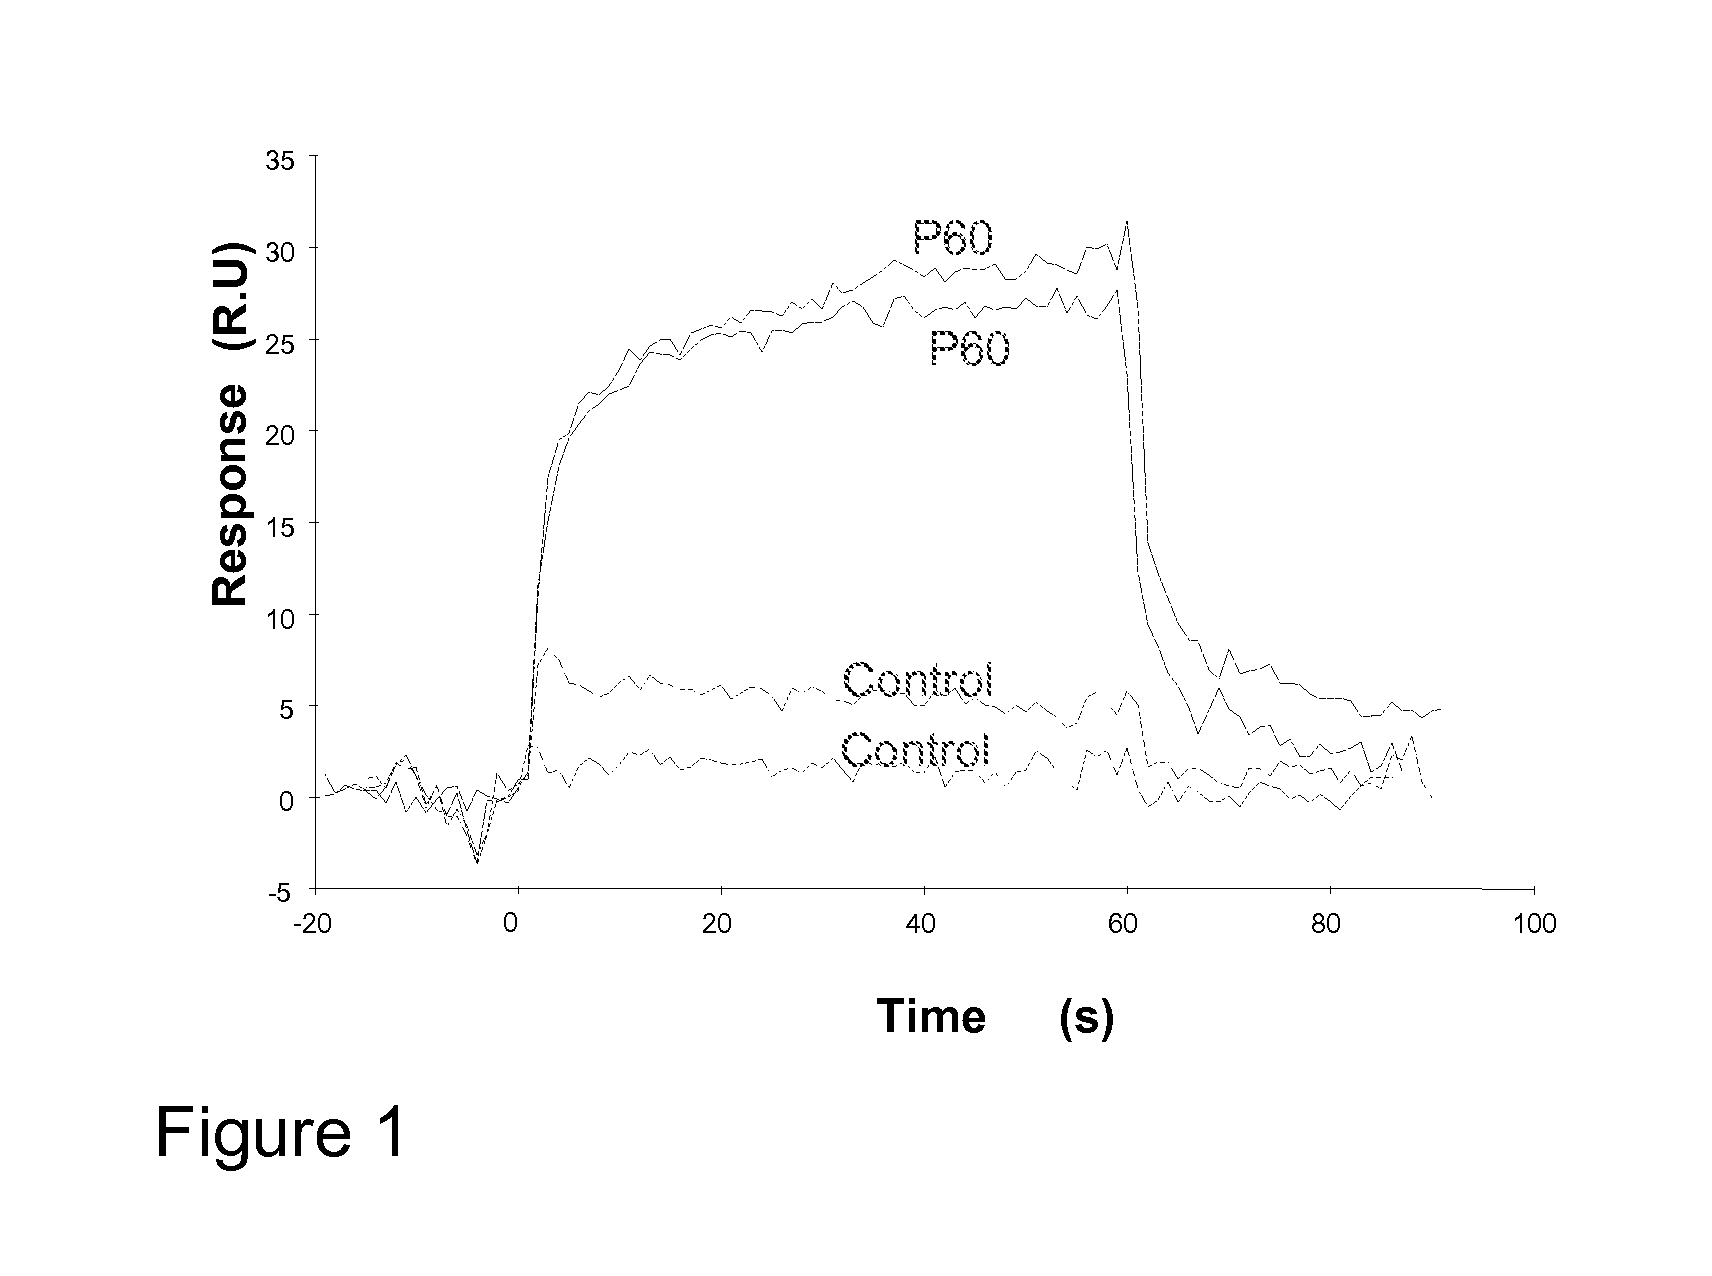 Peptides with capacity to bind to scurfin and applications